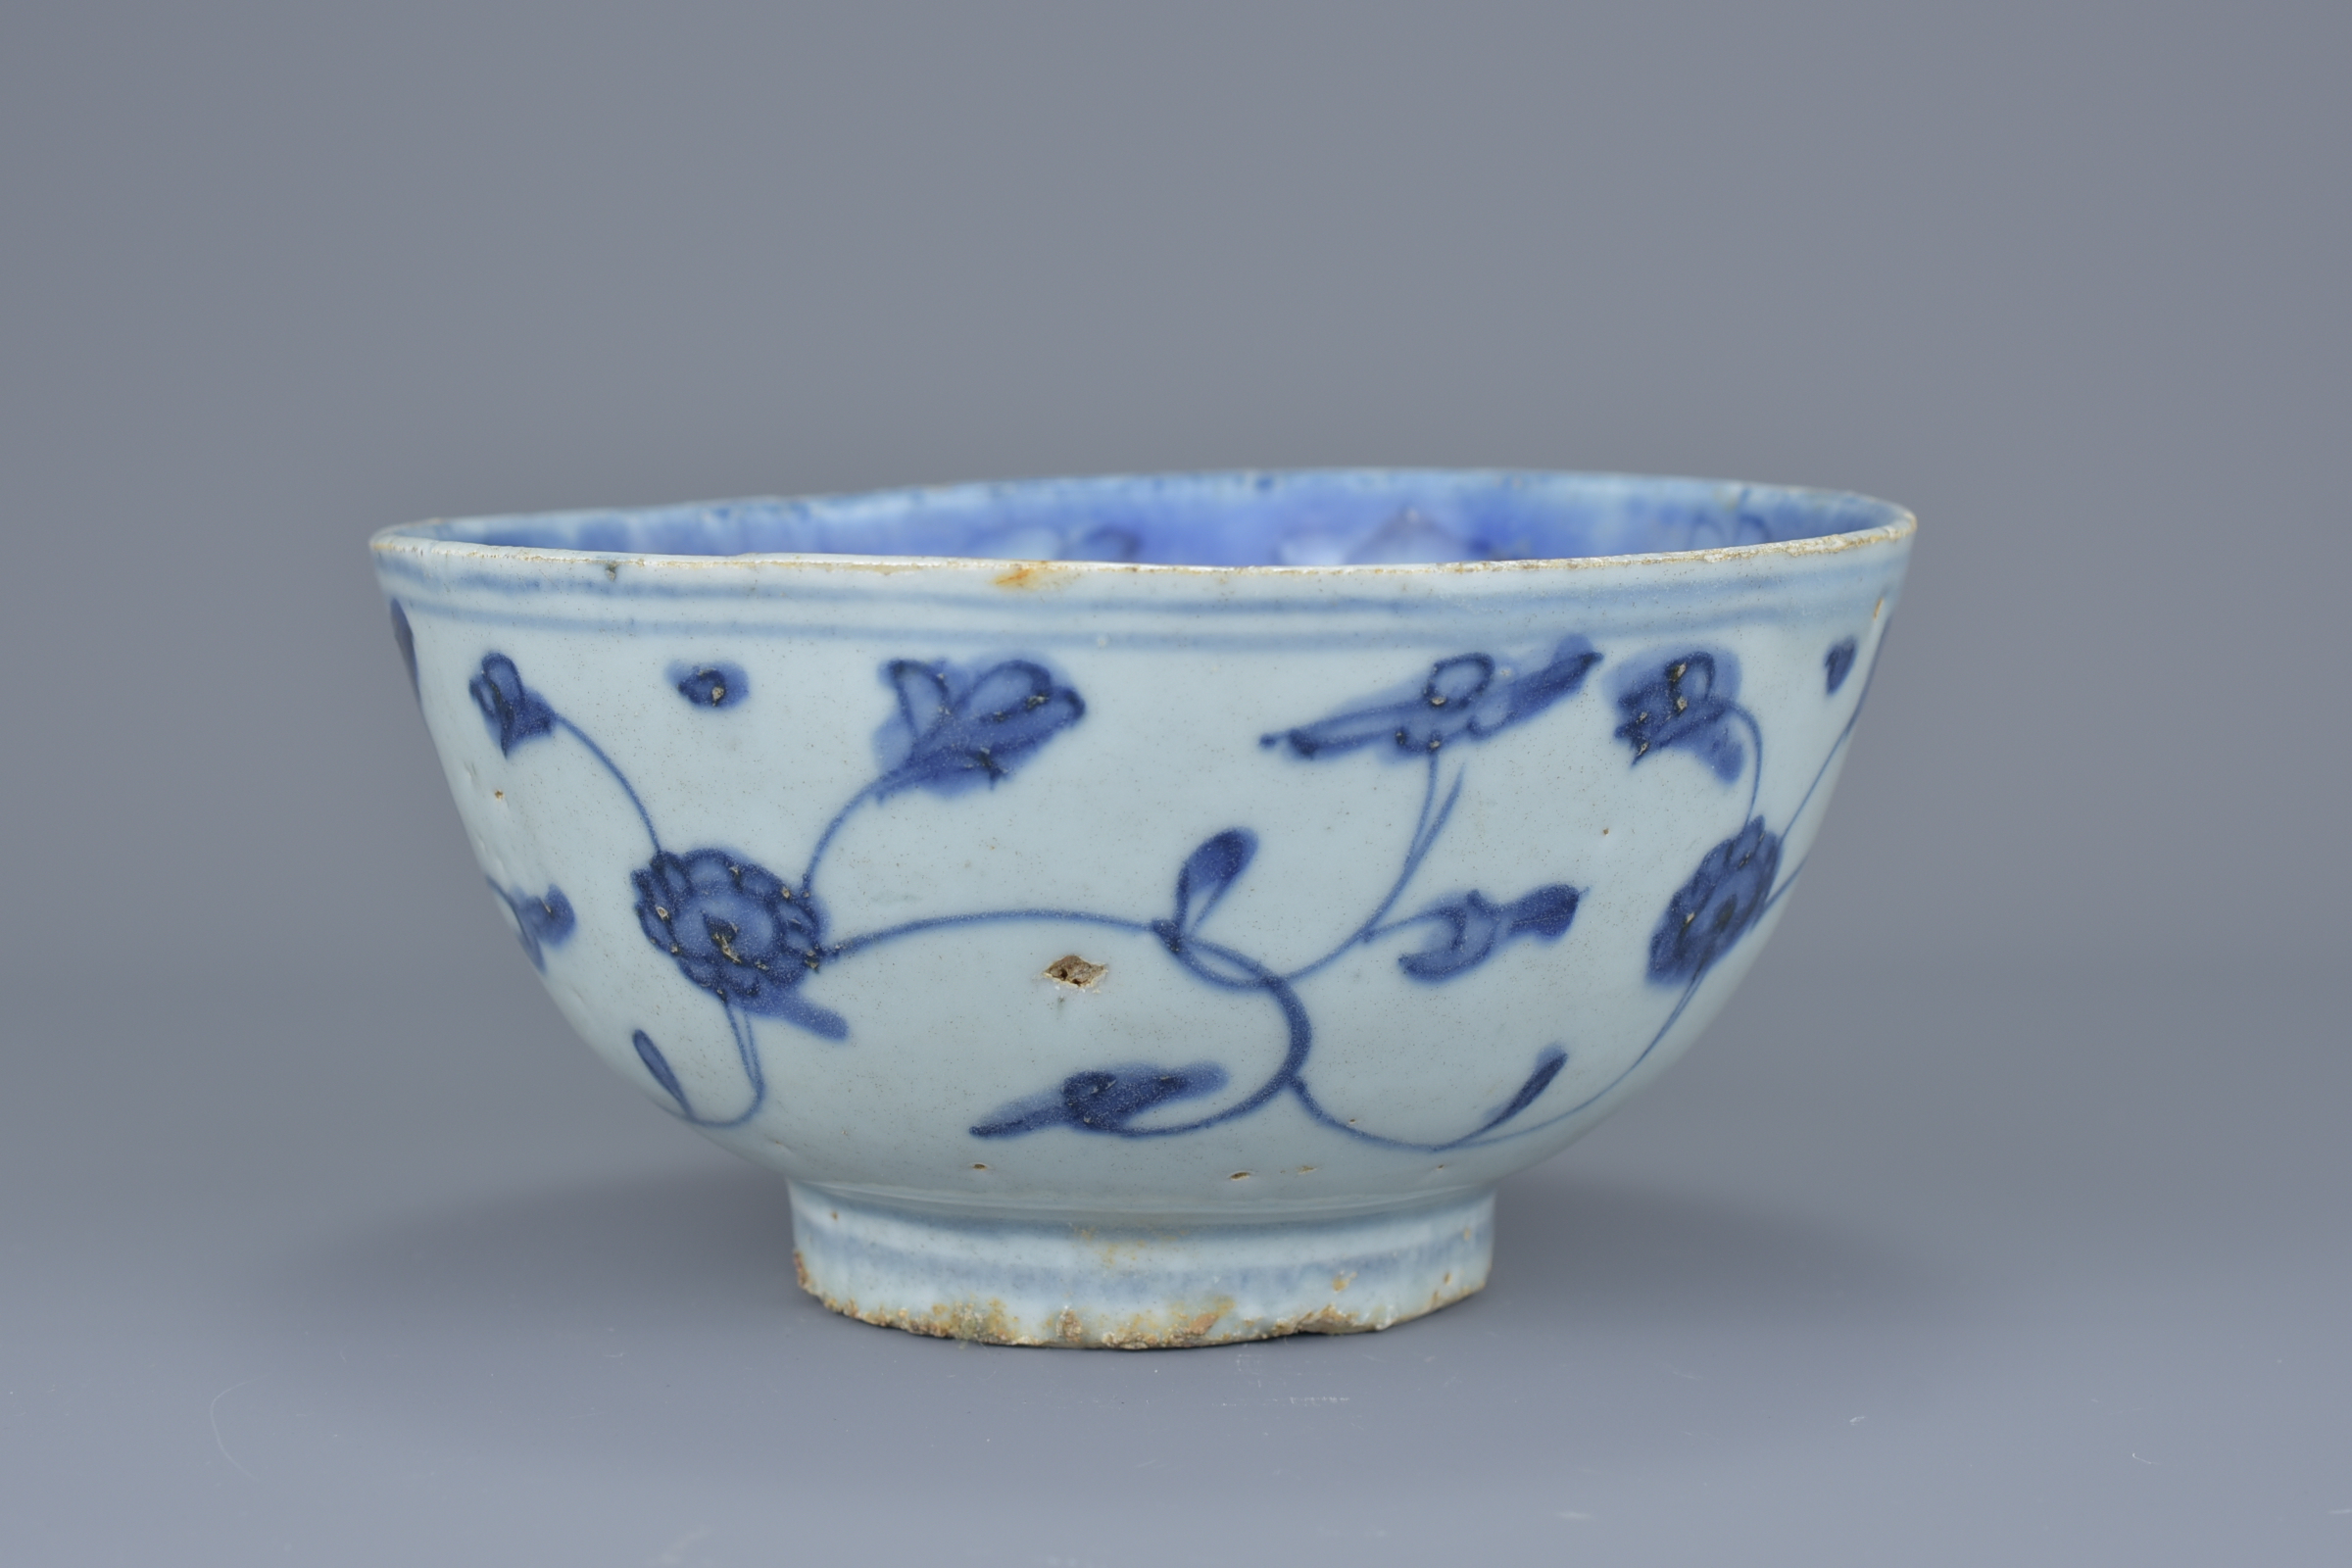 A Fine Chinese Ming Dynasty Blue & White Porcelain Bowl – Jiajing reign - Image 4 of 7